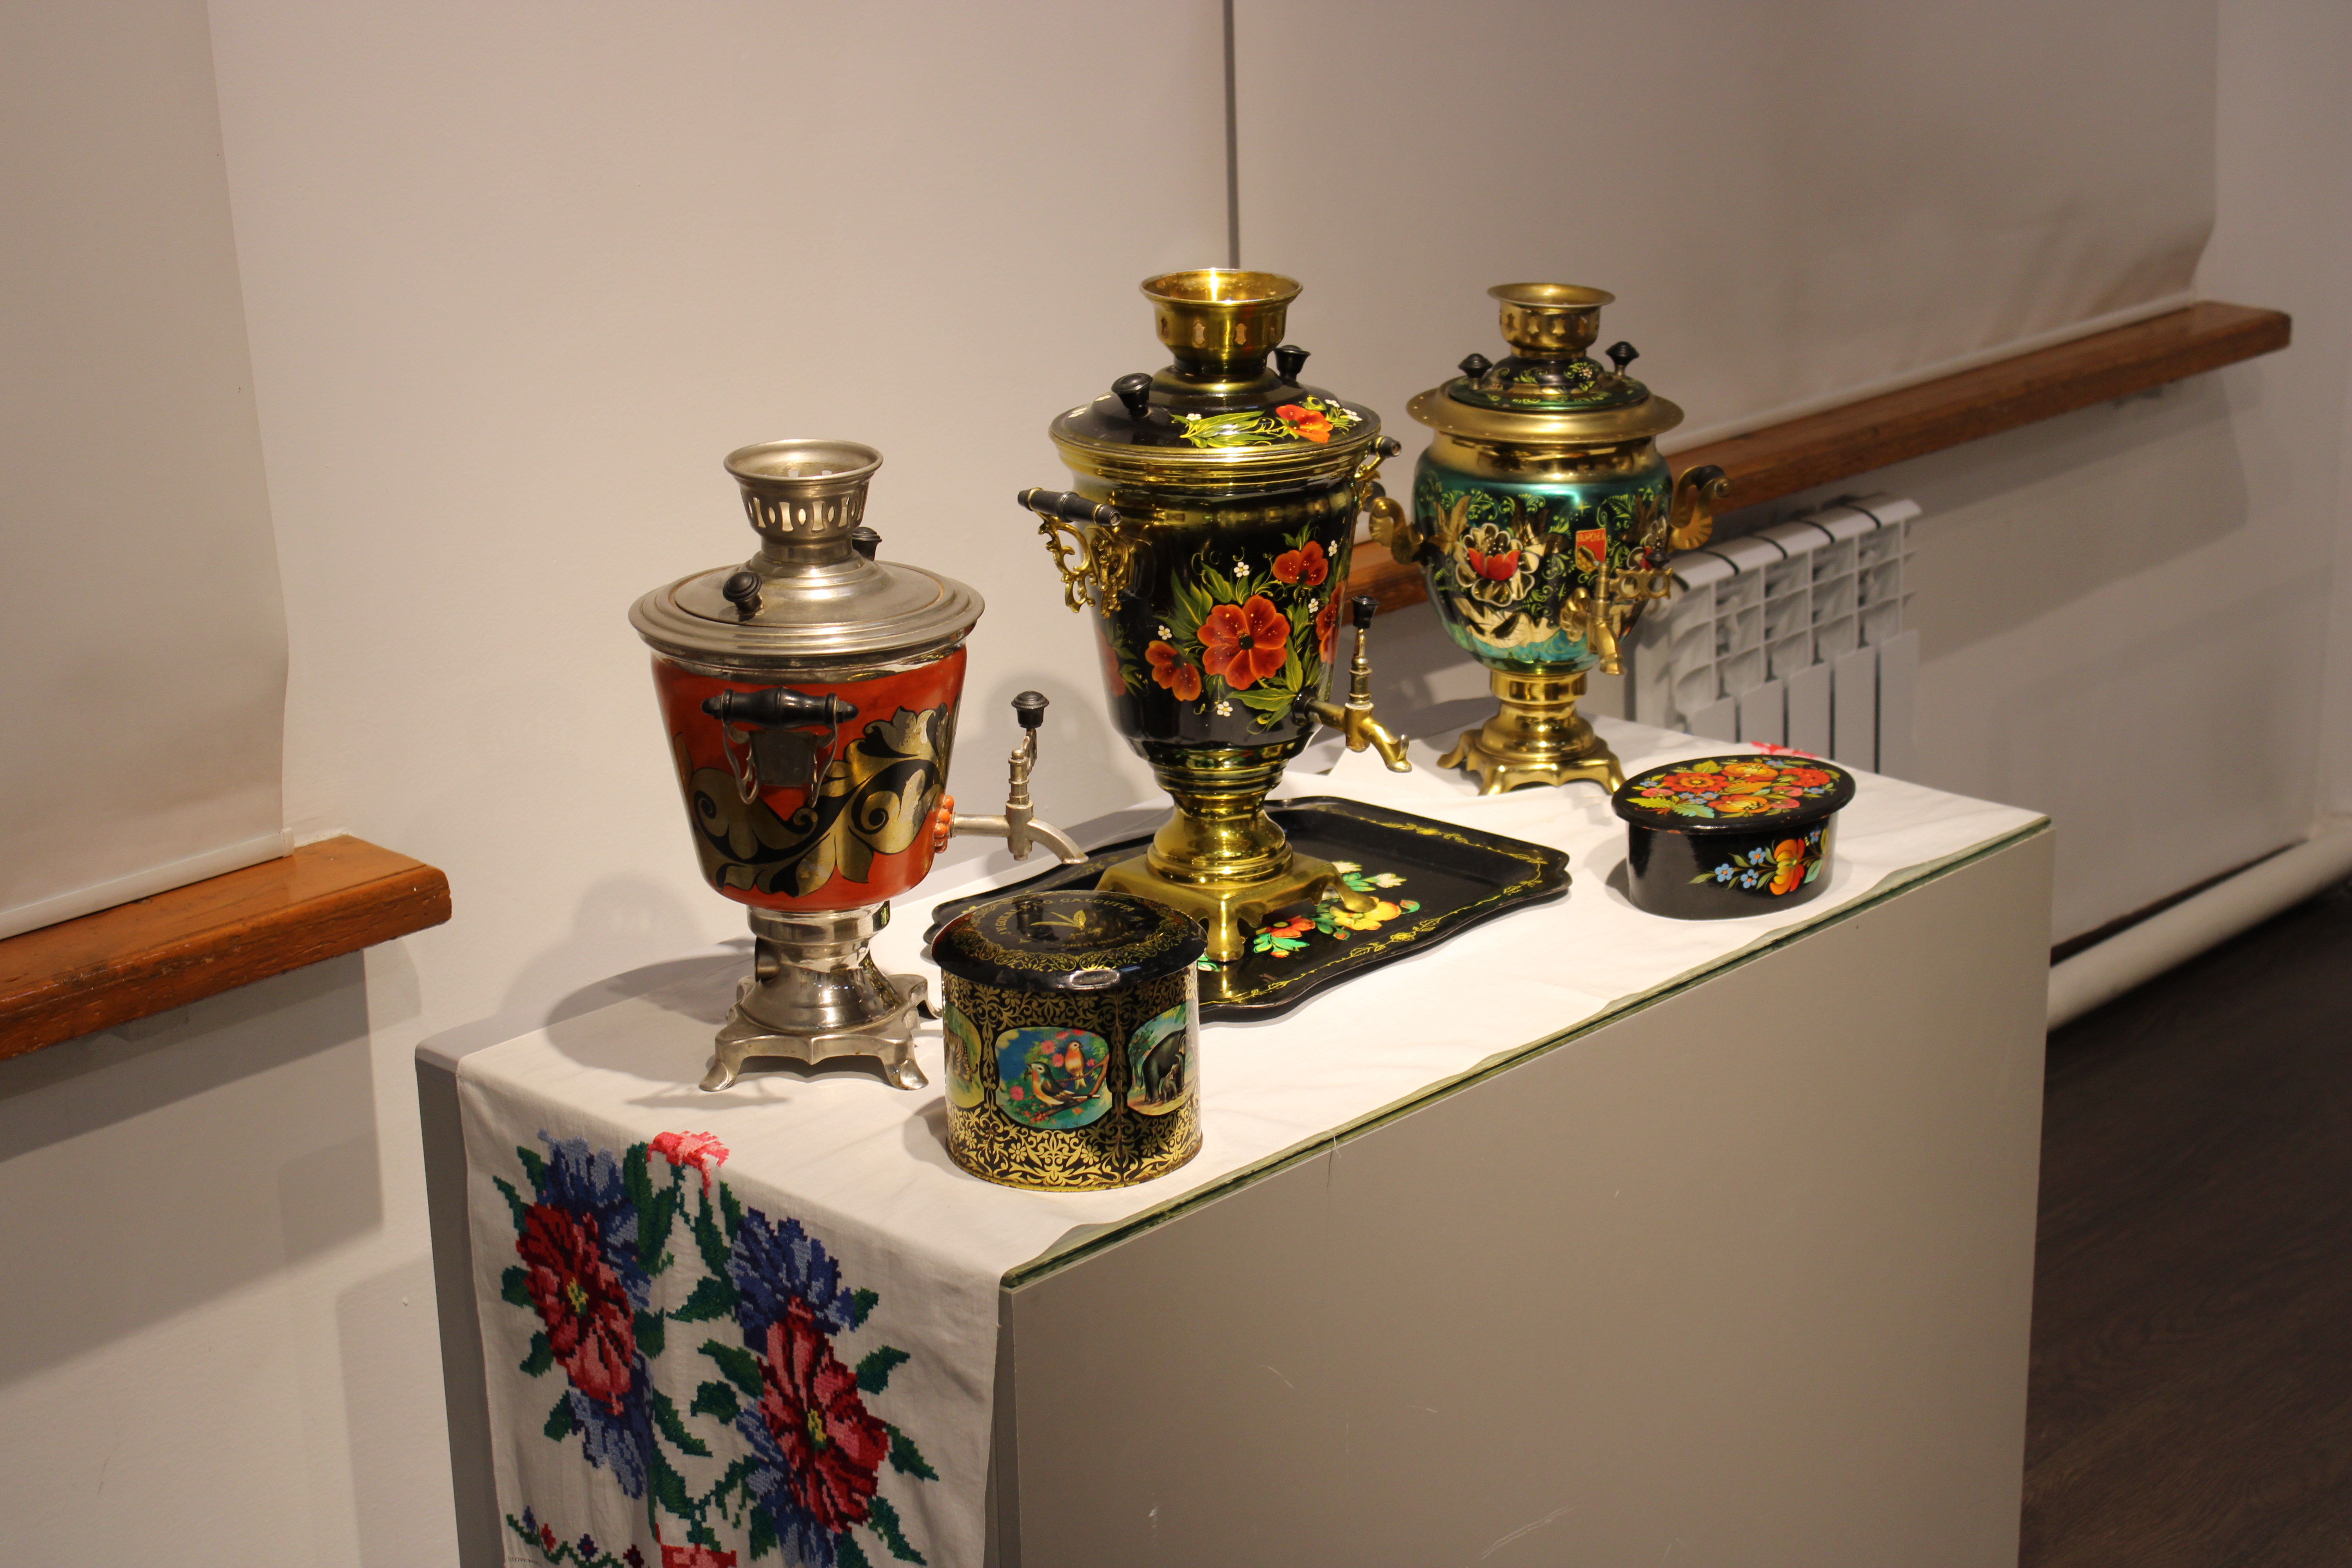 An exhibition of samovars «Samaurynyz sargylmasyn» from the museum’s funds has opened